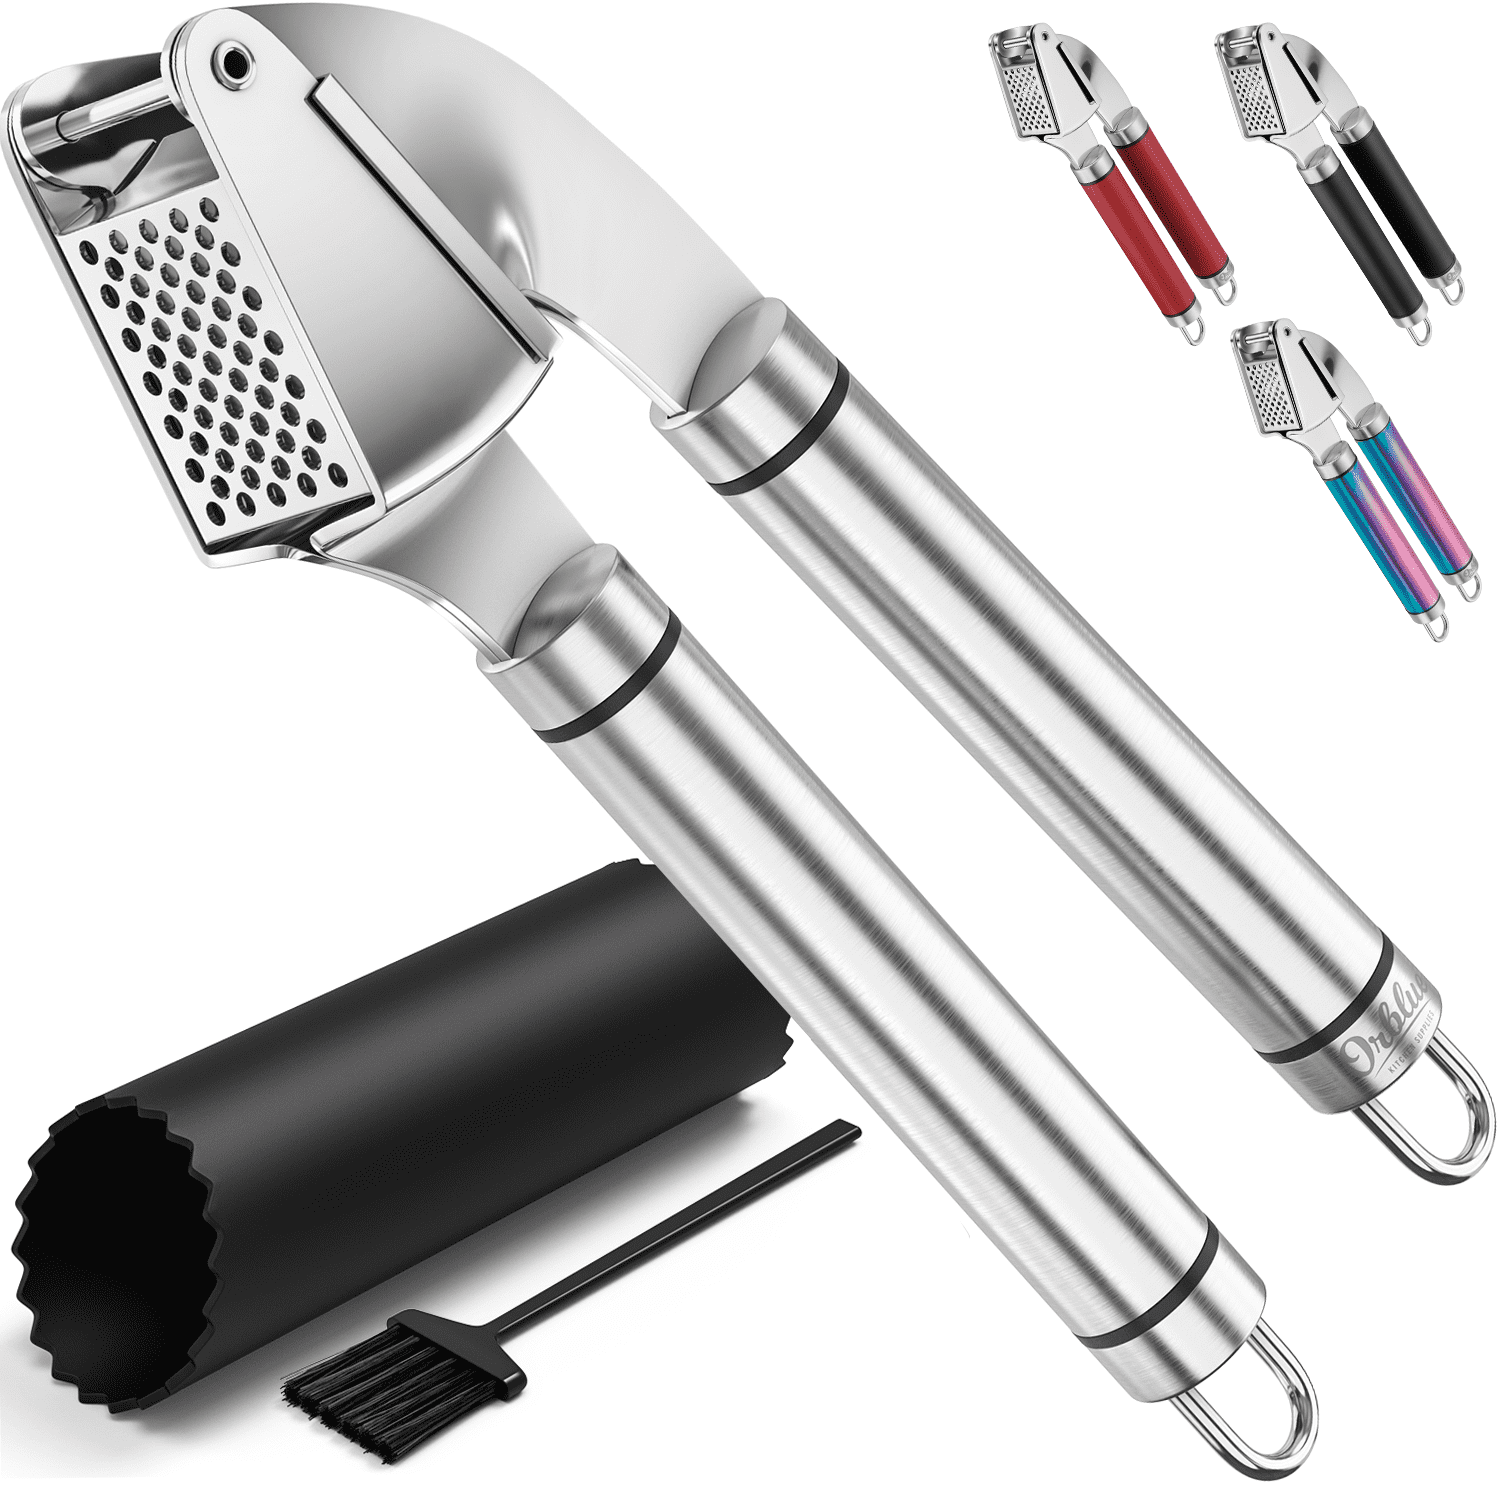 Dropship Garlic Press Rocker; Stainless Steel Garlic Crusher Chopper Mincer  Squeezer to Sell Online at a Lower Price